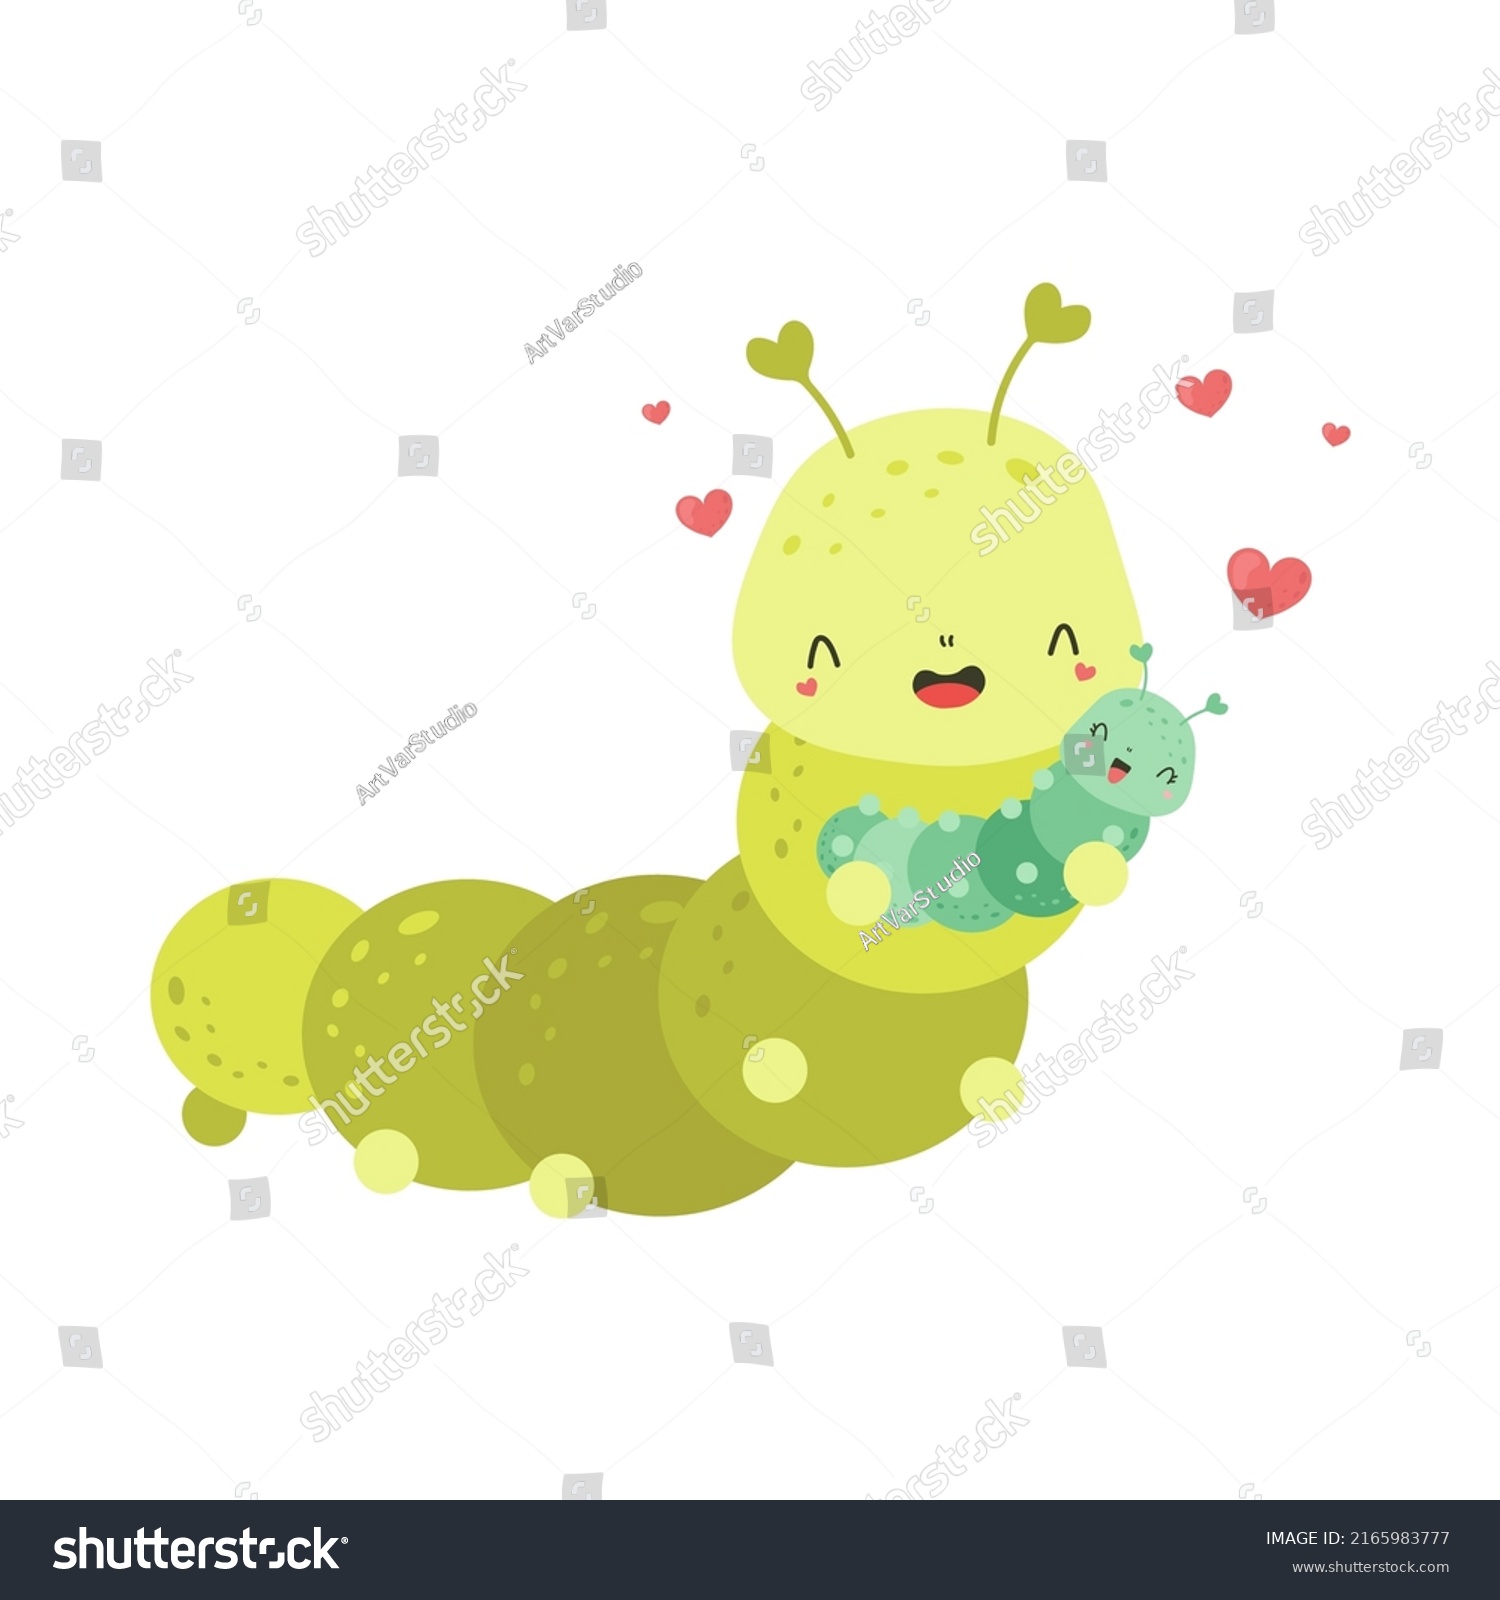 SVG of Cute Caterpillar Clipart for Kids Holidays and Goods. Happy Clip Art Fox Caterpillar with Baby. Vector Illustration of an Animal for Stickers, Prints for Clothes, Baby Shower Invitation.  svg